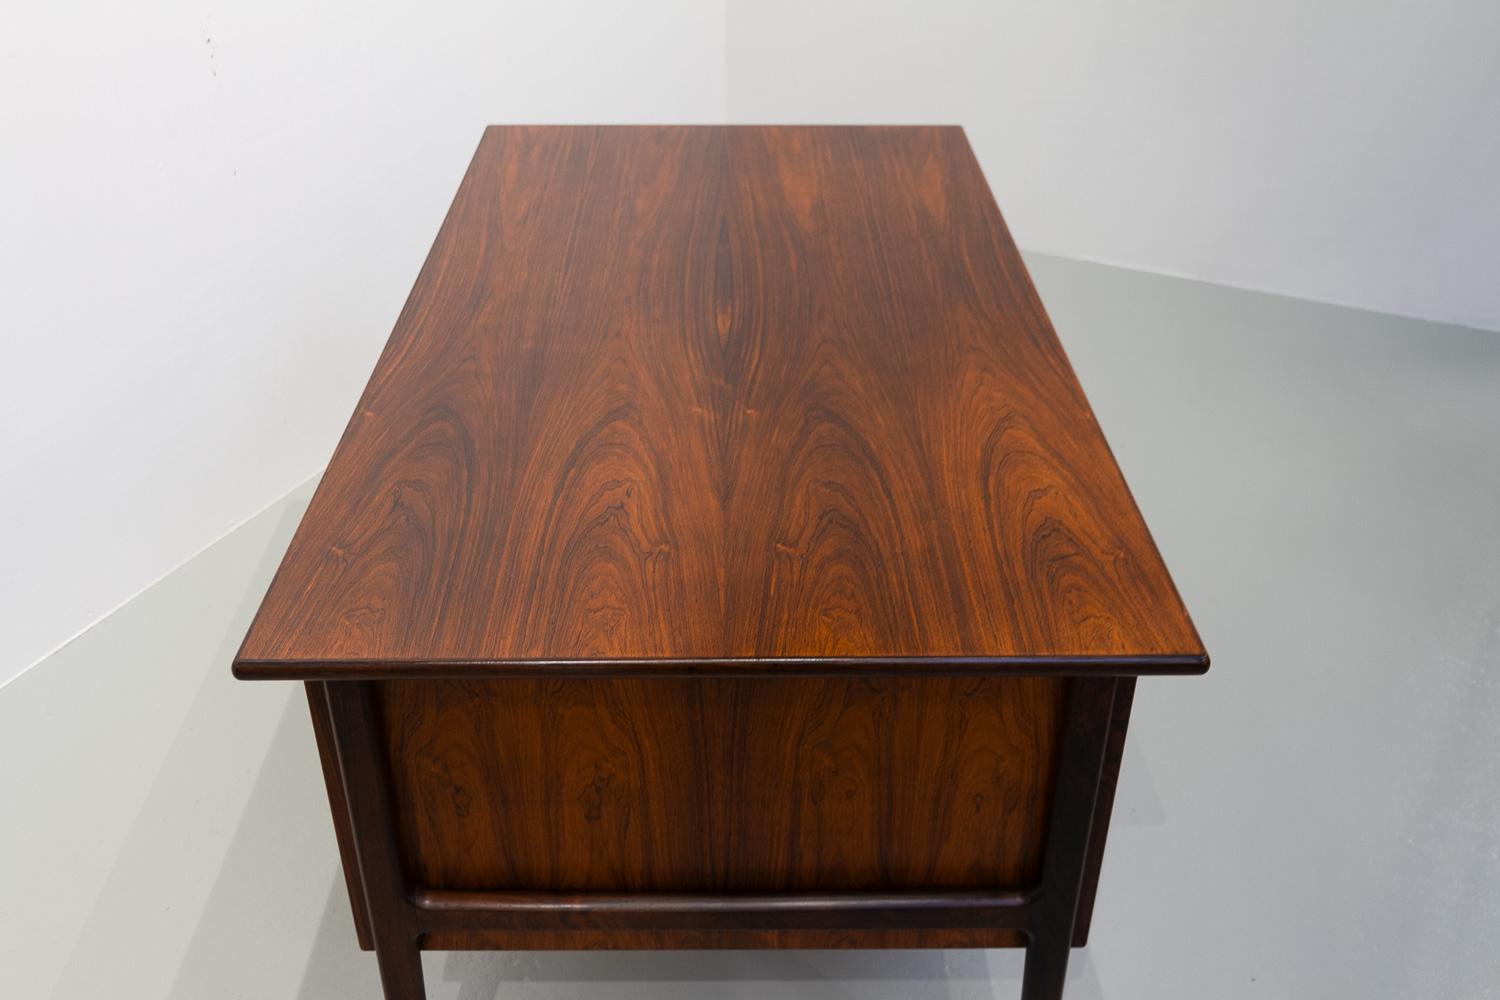 Danish Modern Executive Freestanding Rosewood Desk, 1960s.
Elegant and stylish double sided writing desk in very expressive book matched rosewood/palisander veneer manufactured in Denmark in the 1960s.
Front with three drawers and cabinet with wide